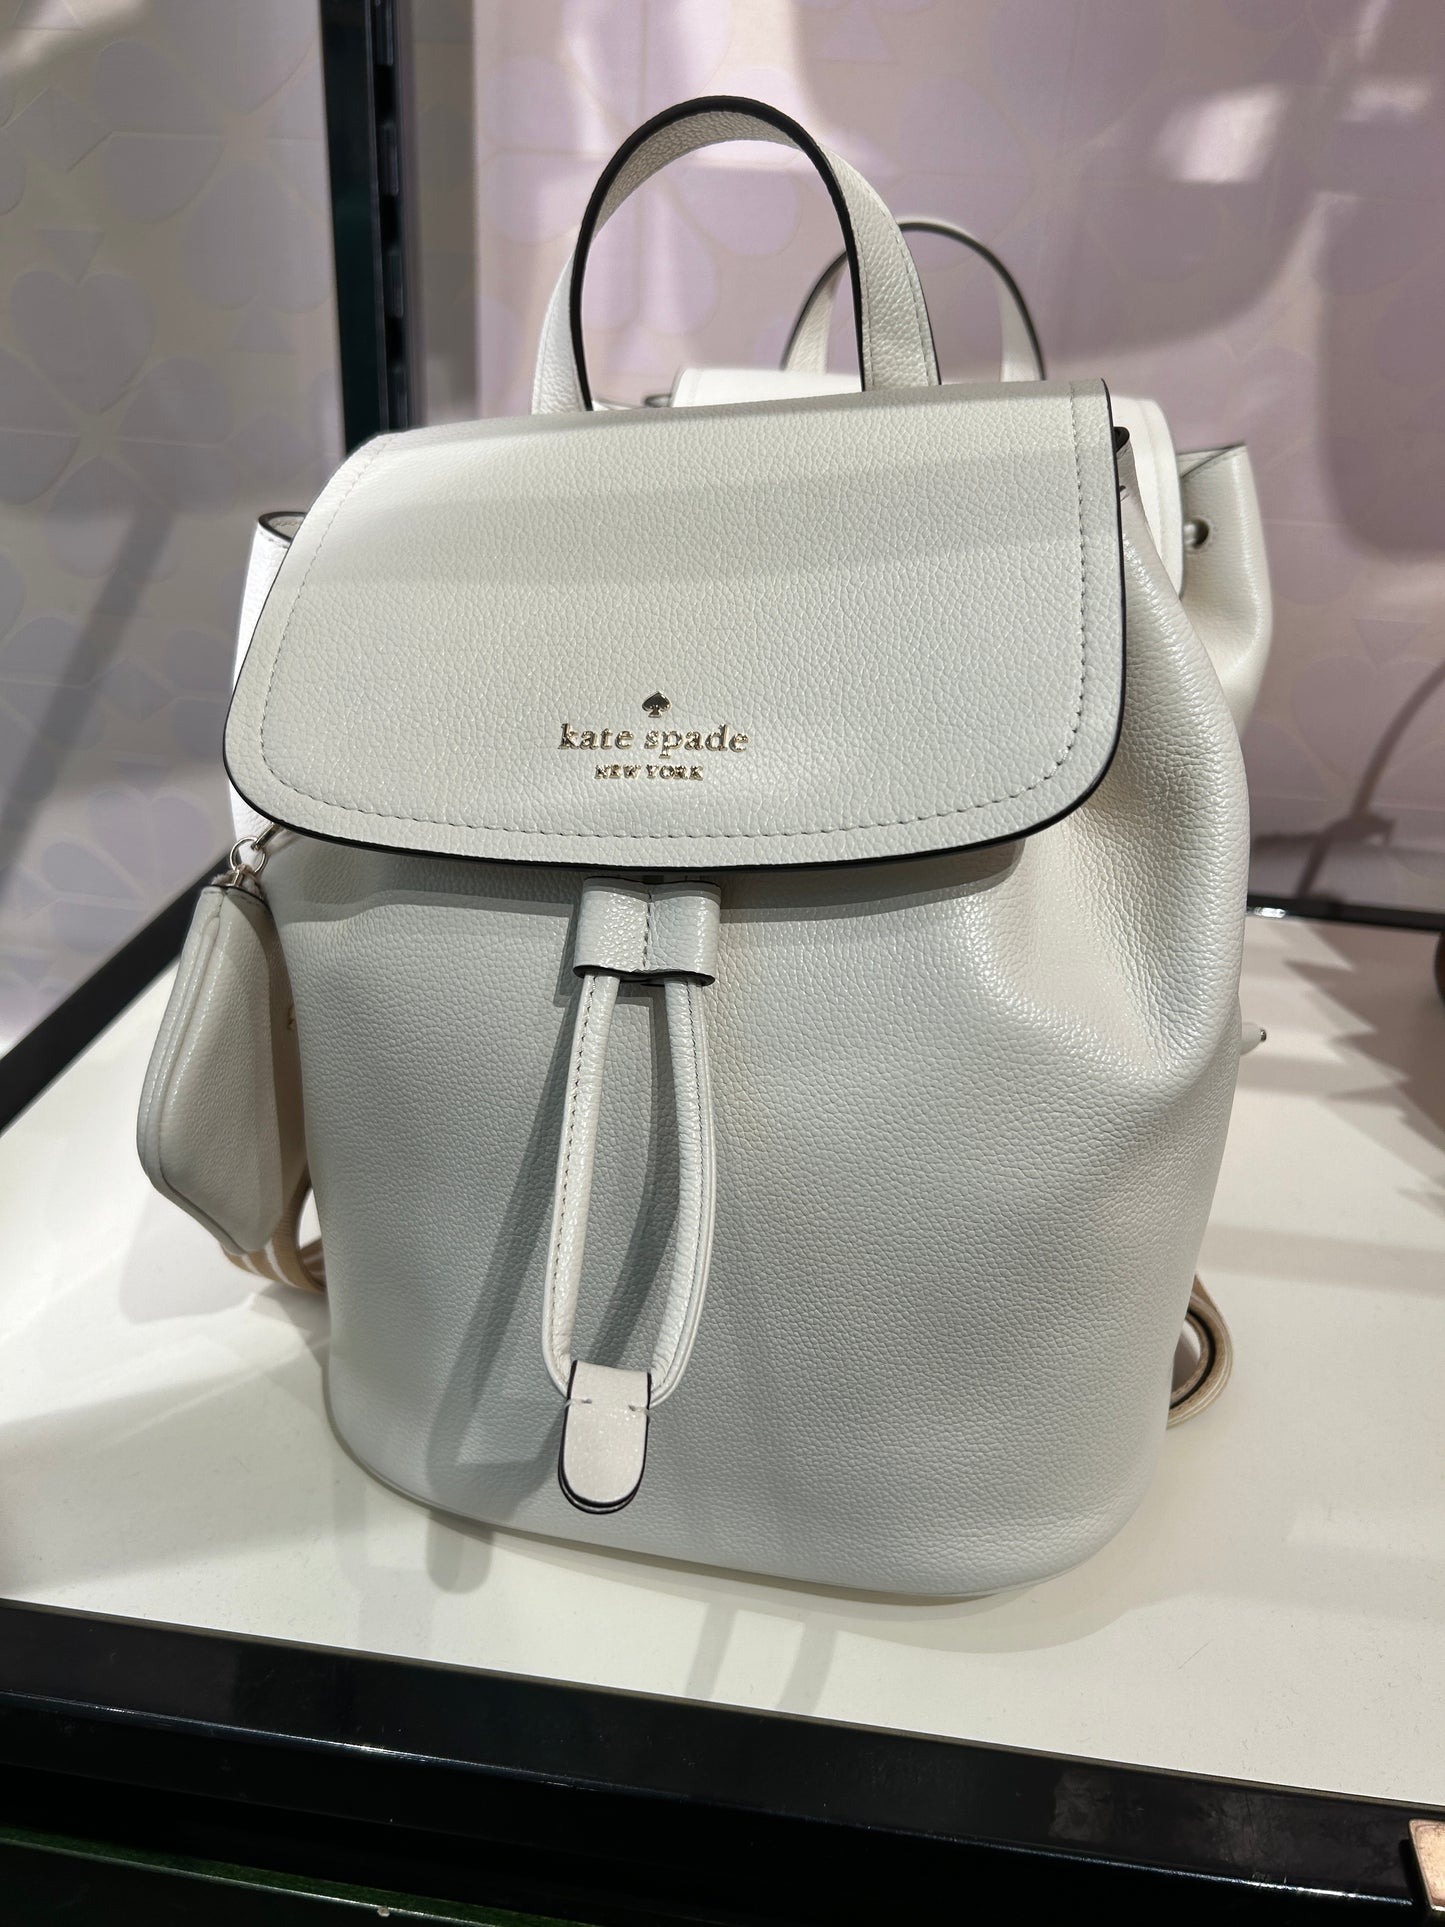 Load image into Gallery viewer, Kate Spade Rosie Medium Flap Backpack In Parchment Multi (Pre-Order)
